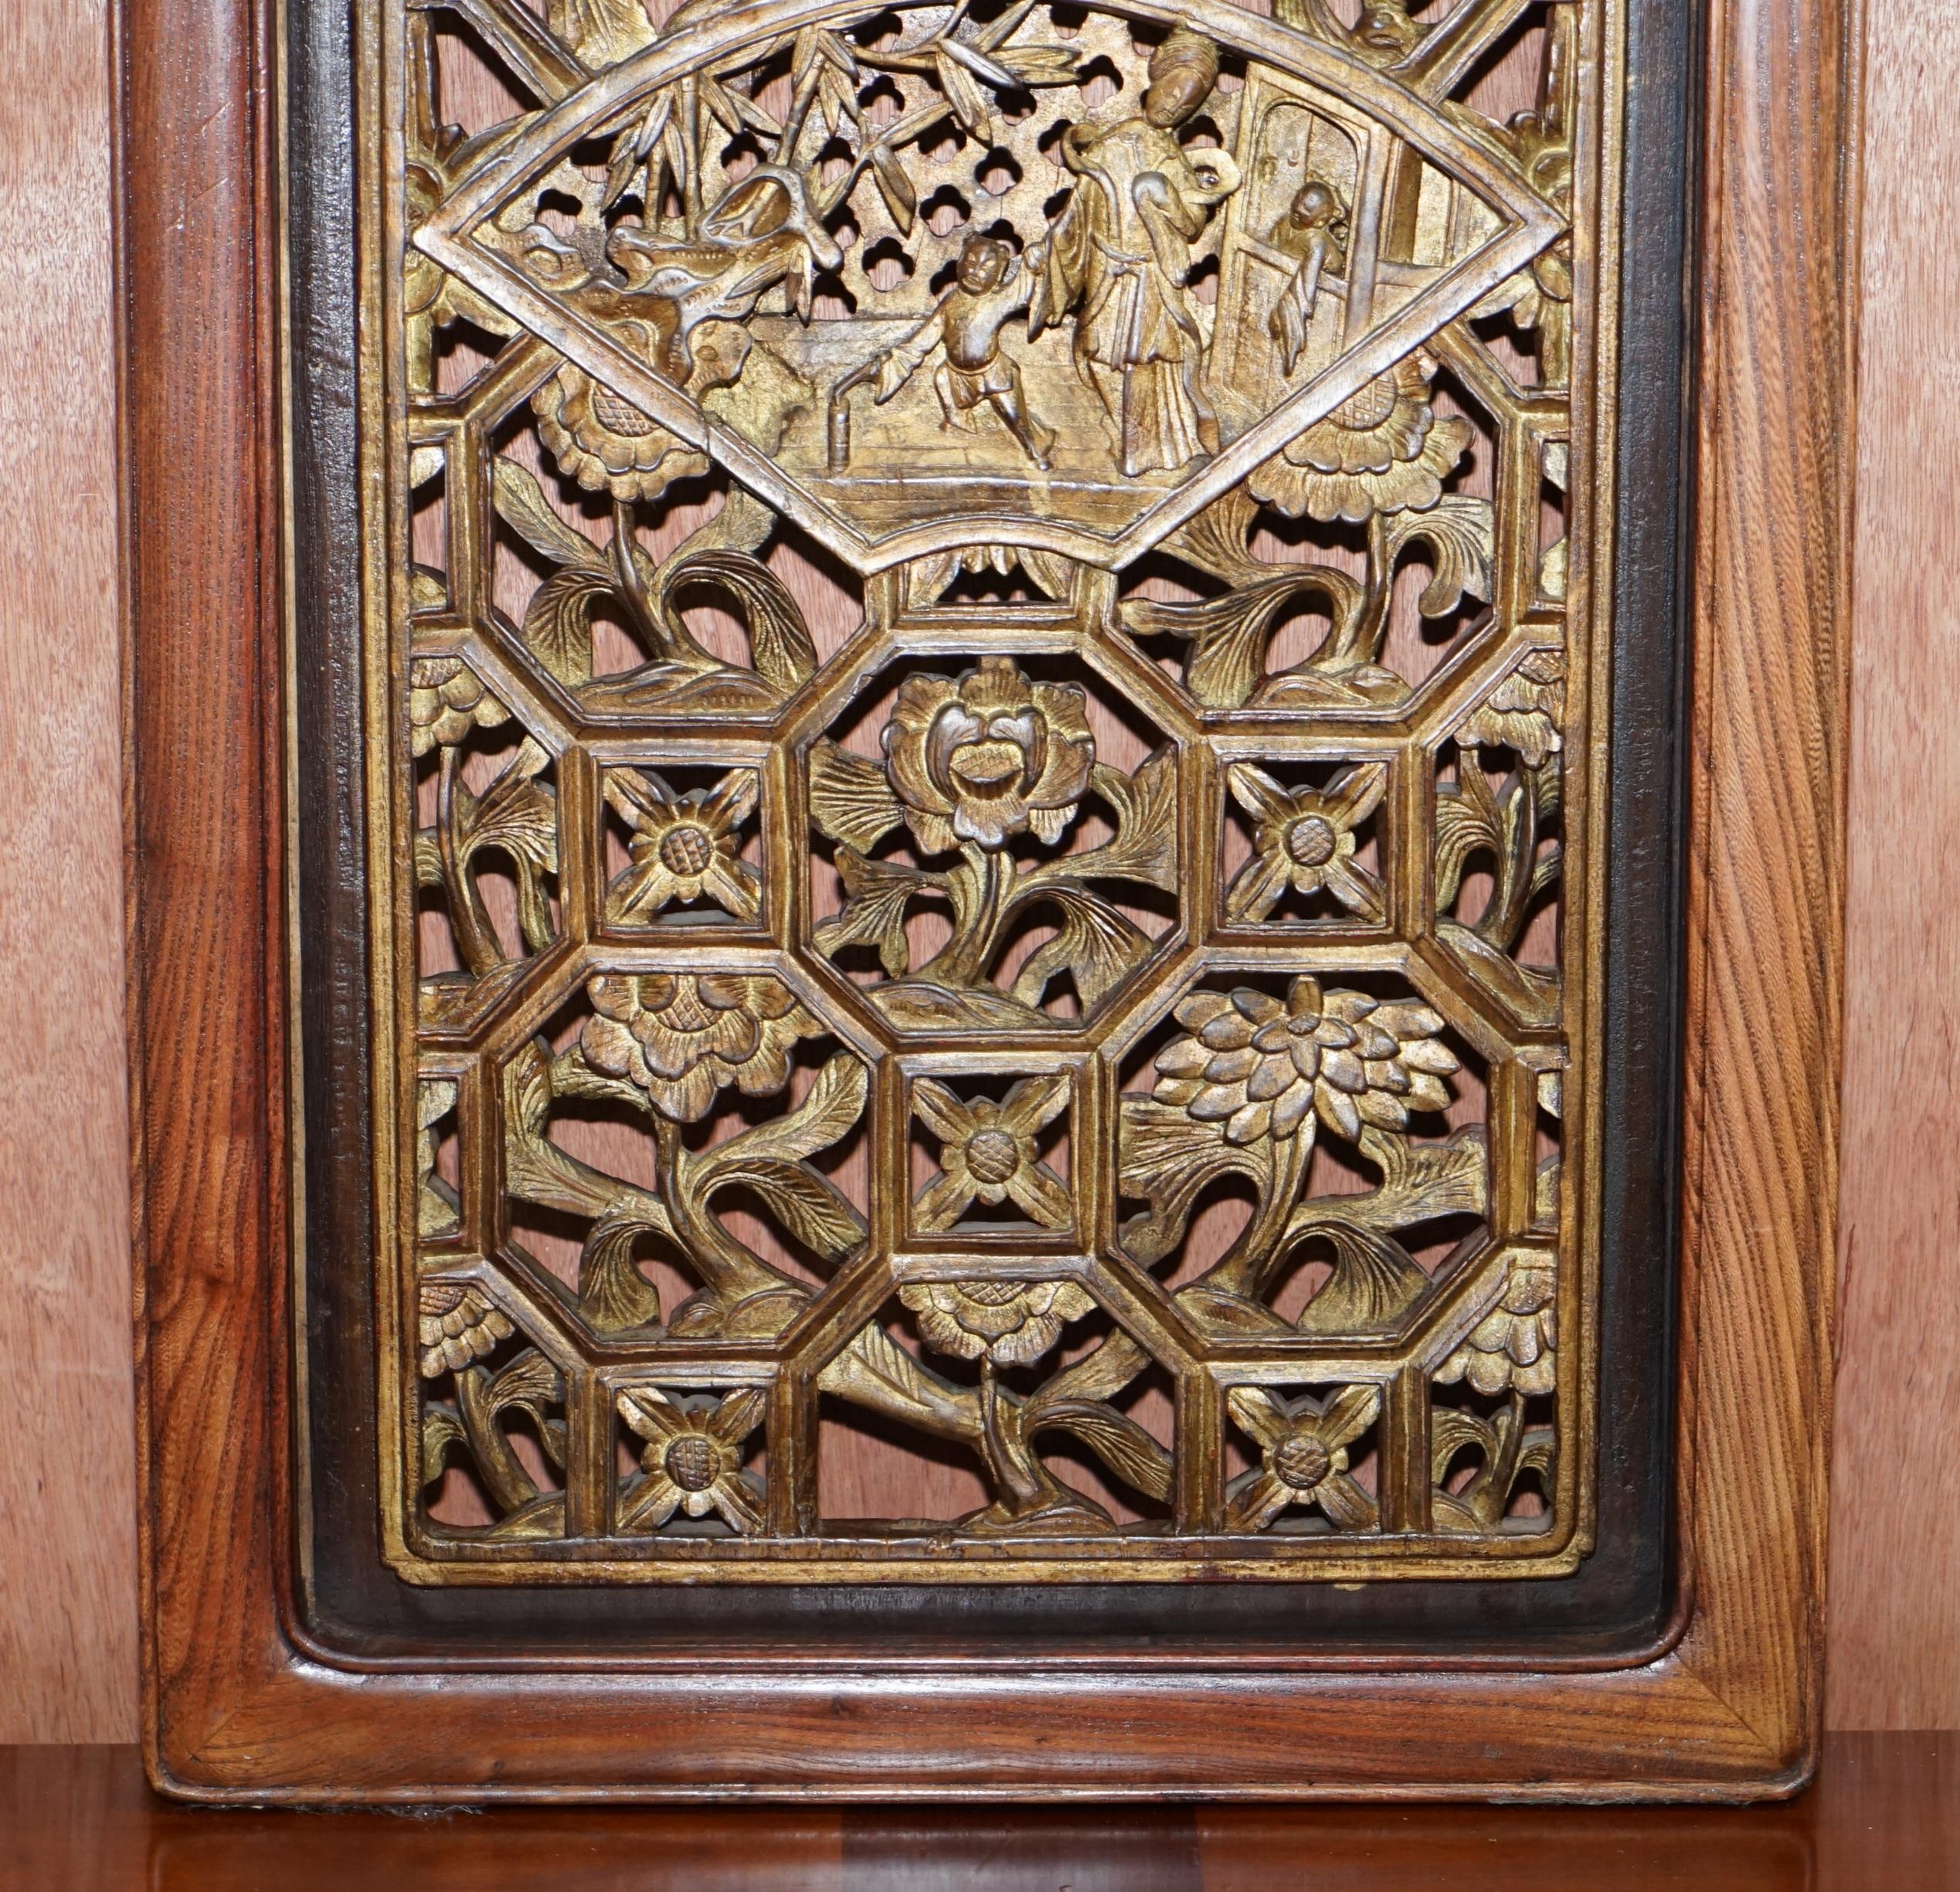 We are delighted to this lovely circa 1900 hand carved and paint Chinese Export wall panel

A very good looking and well-made piece, would suit any setting its ornately carved in solid teak, it has gold leaf painting, it’s a very well made